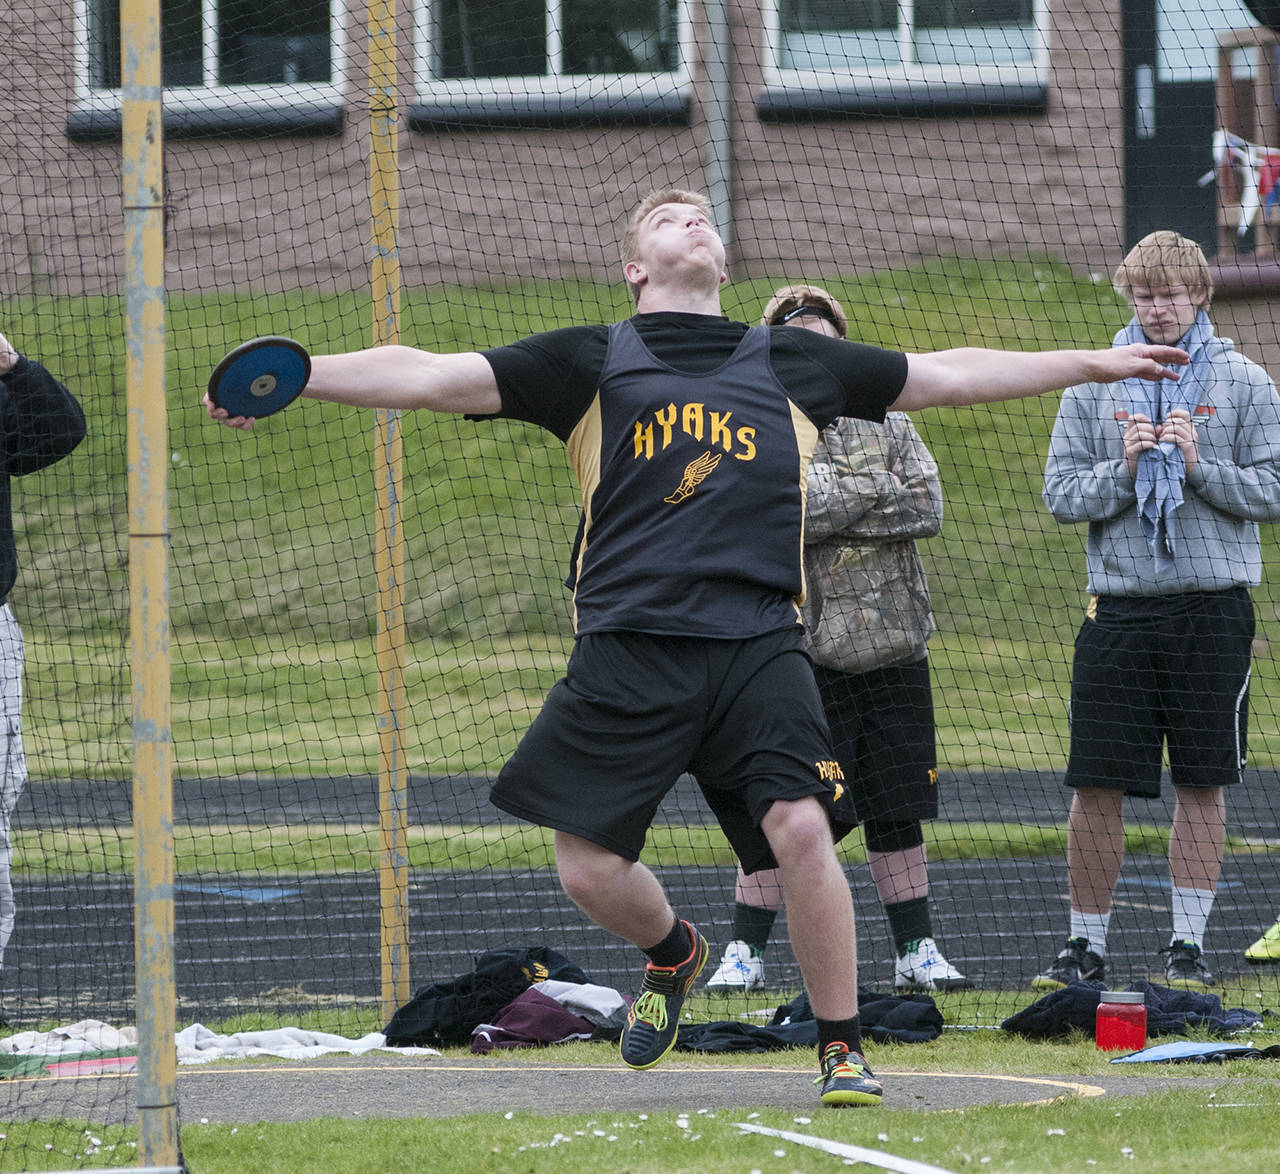 (Brendan Carl | The Daily World) North Beach’s Seth Bridge, seen here throwing the discus at the 2016 Grays Harbor All-County Track Championships, is one of the favorites to win the discus during this year’s meet on Saturday.